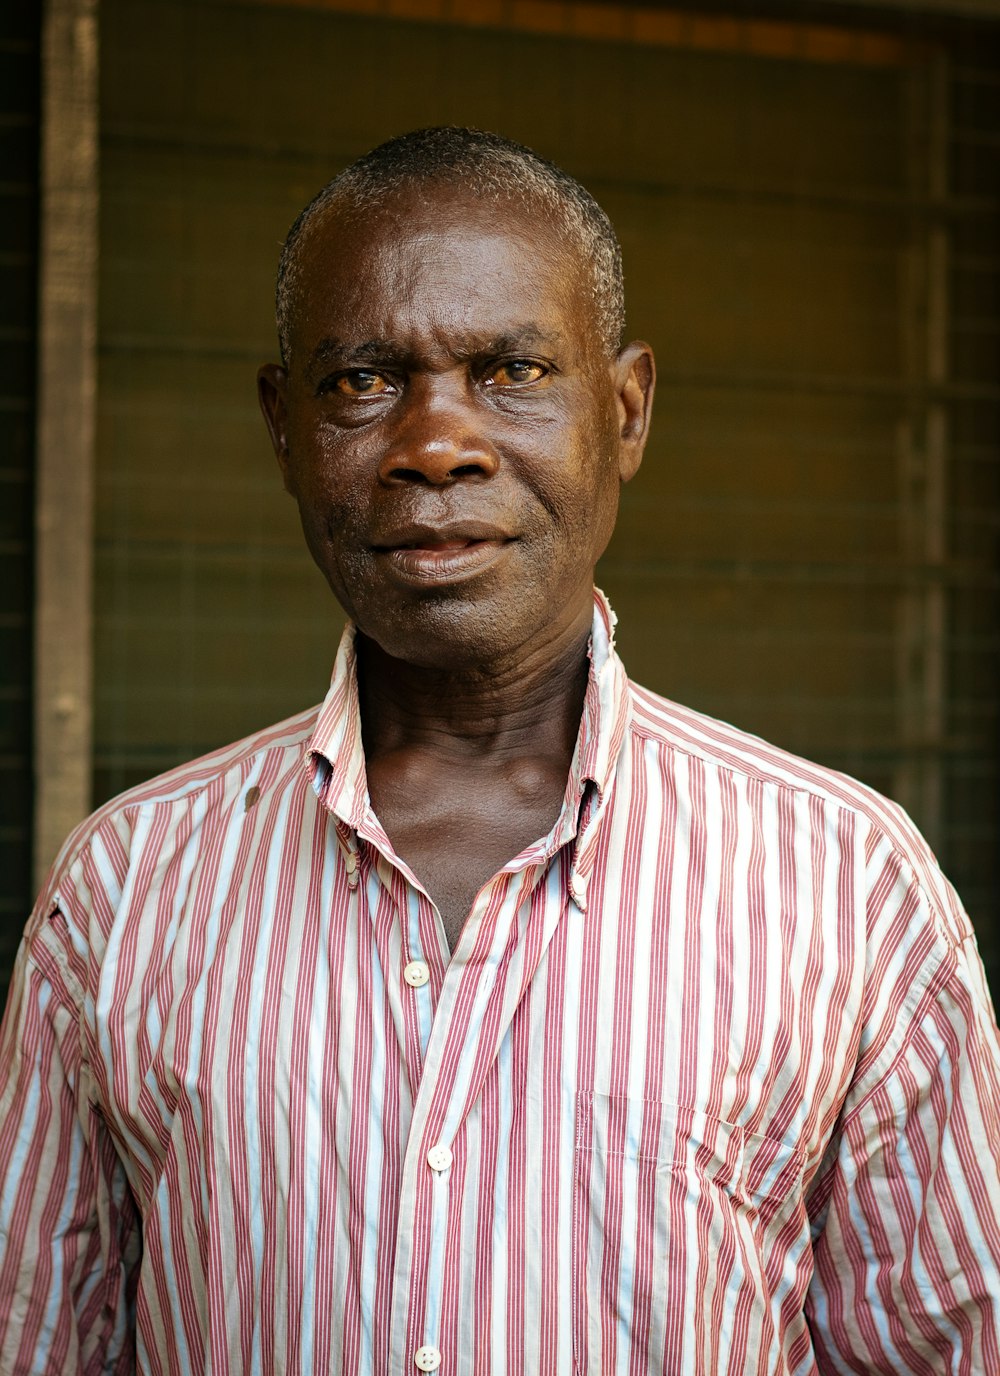 a man wearing a red and white striped shirt